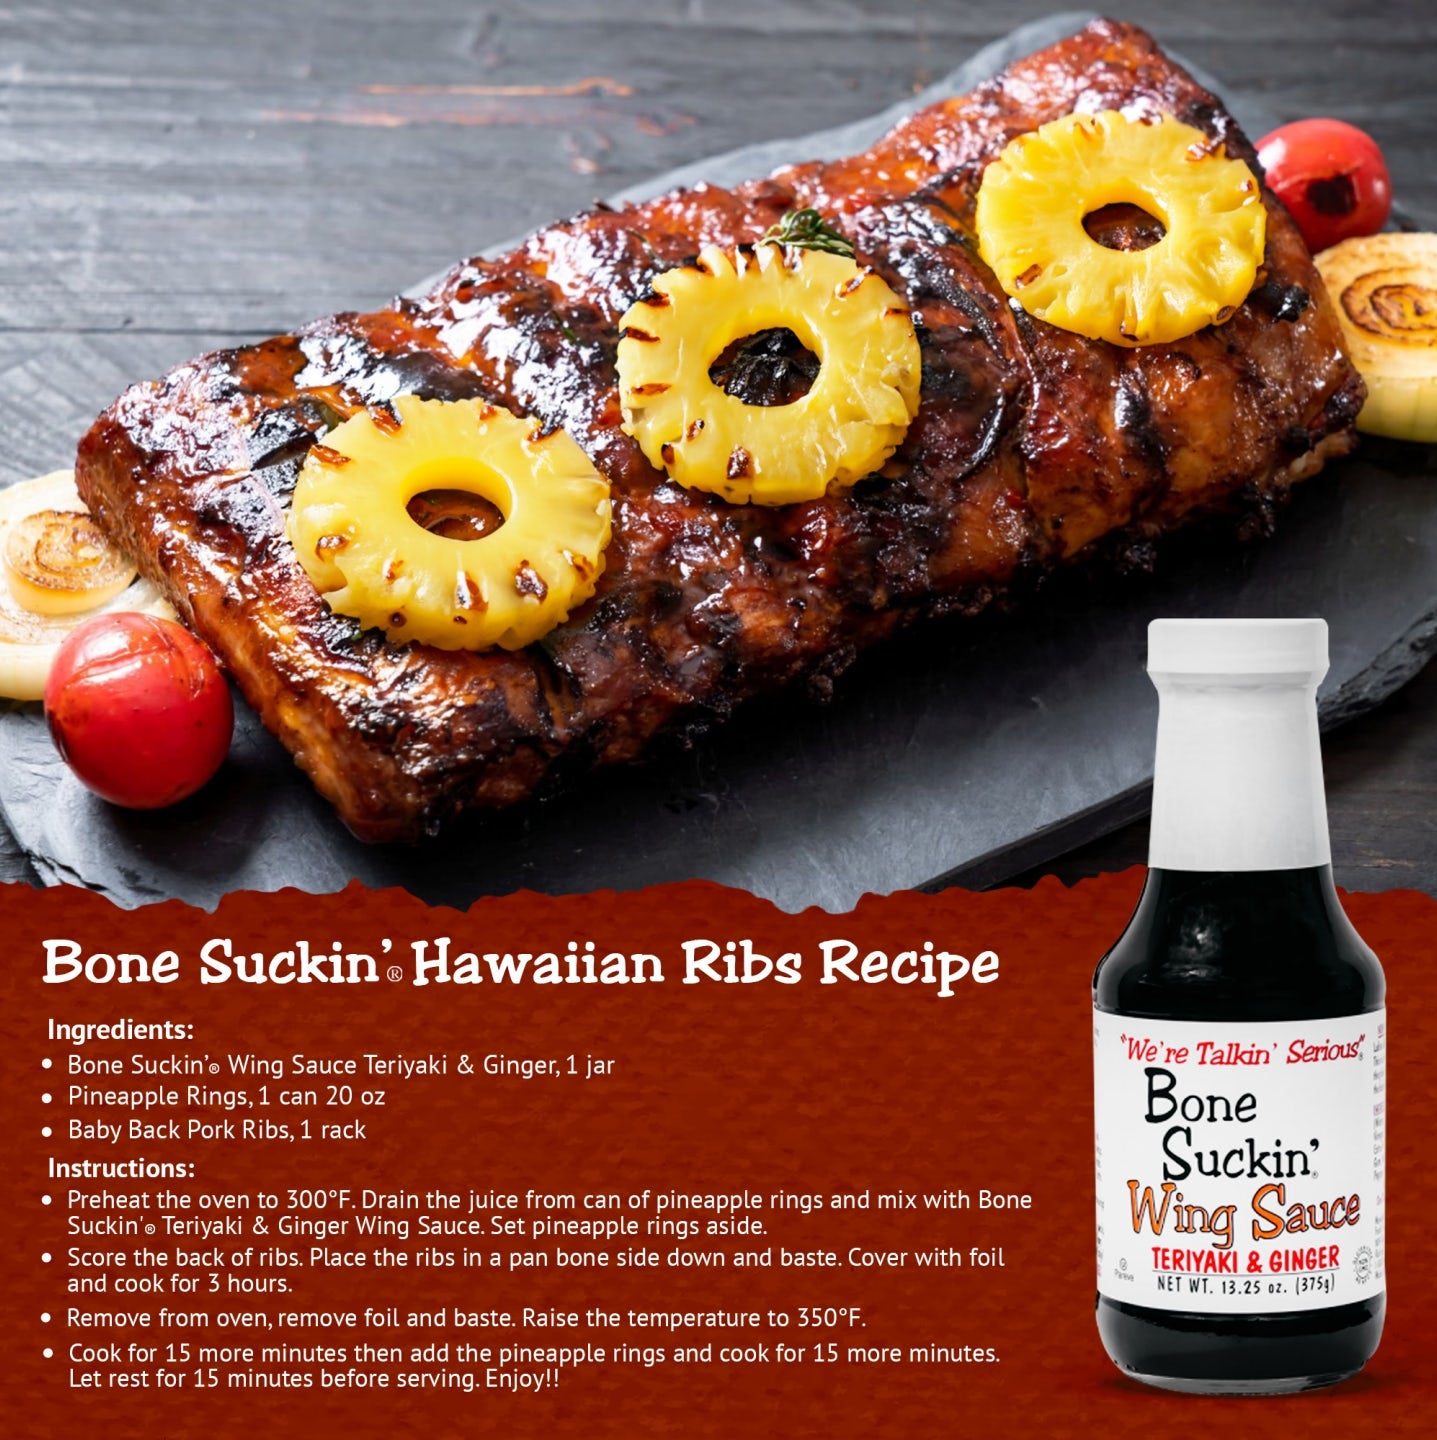 Bone Suckin' Hawaiian Ribs Recipe. Ingredients: 1 Jar Bone Suckin' Teriyaki and Ginger Wing Sauce, pineapple rings, 20 oz can. 1 rack baby back pork ribs. Instructions: Preheat oven to 300F. Drain juice from can of pineapple rings and mix with wing sauce. Set aside. Score back of ribs. Place ribs in a pan bone side down and baste. Cover with foil and cook 3 hours. Remove from oven, remove foil and baste. Raise temperature to 350F. Cook 15 more minutes. Add pineapple rings, cook 15 more minutes. Let rest